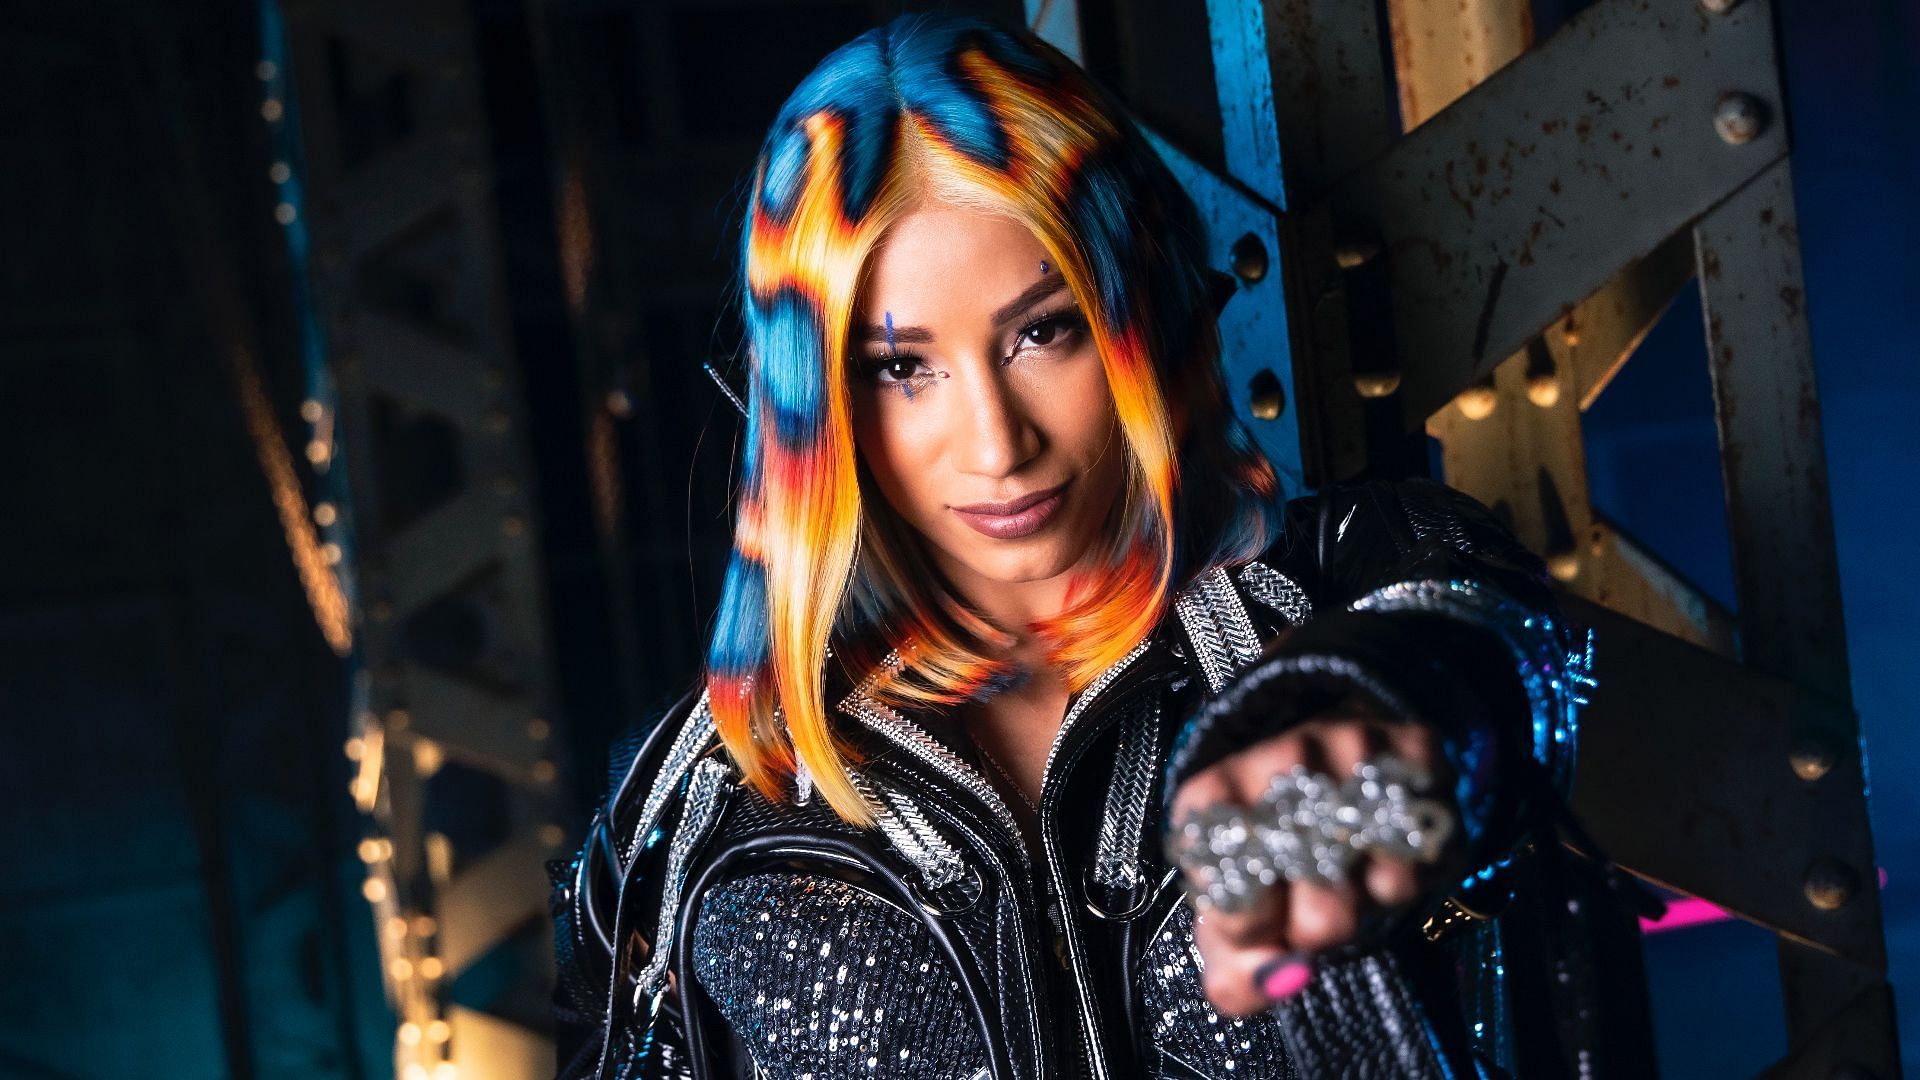 The former Sasha Banks most recently competed for NJPW